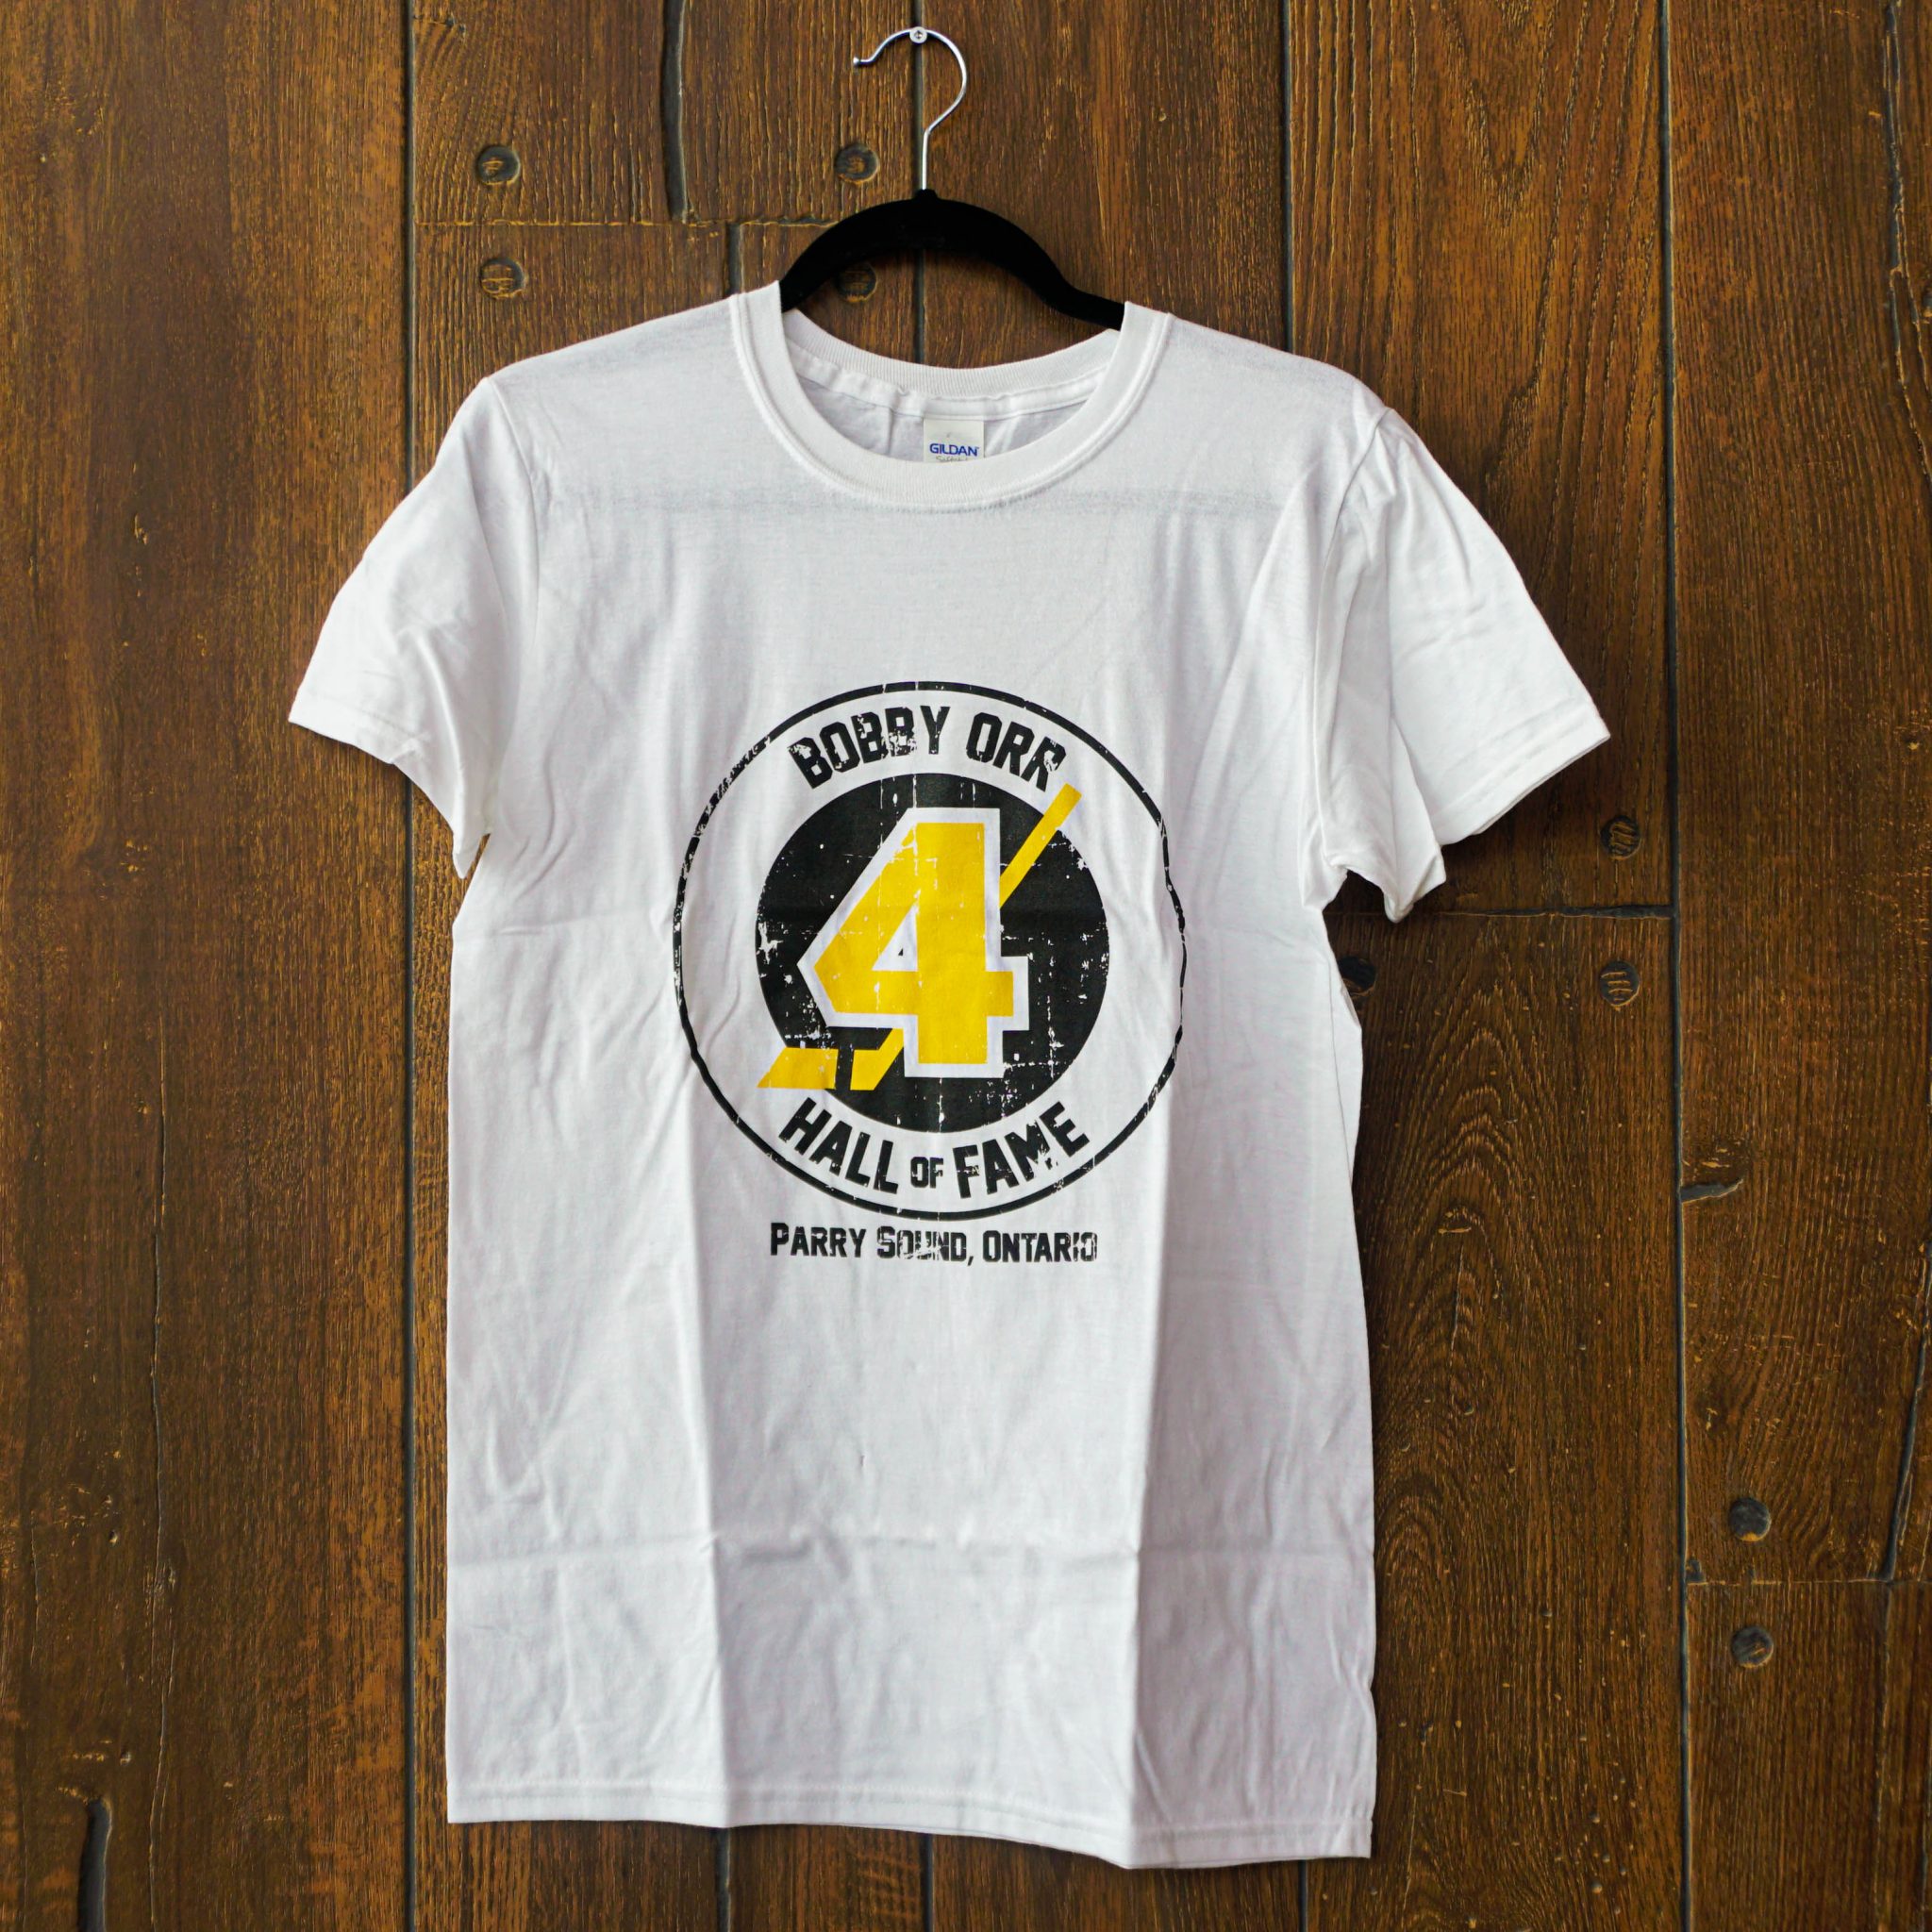 Men's Two-Tone Distressed White T-Shirt > Bobby Orr Hall of Fame